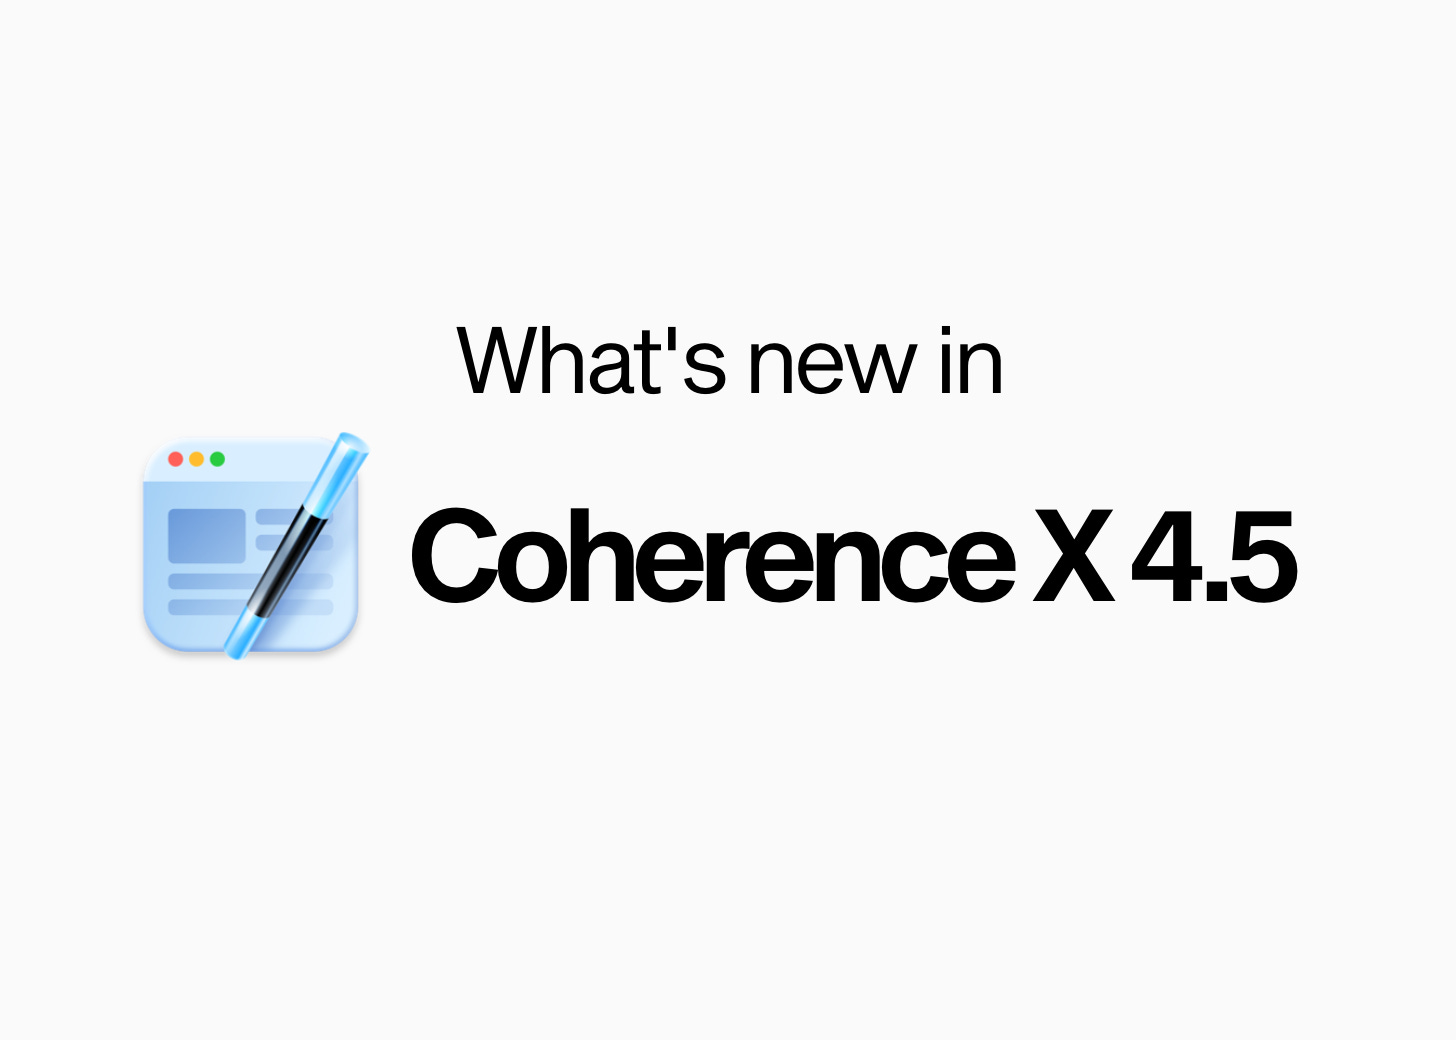 What's new in Coherence X 4.5